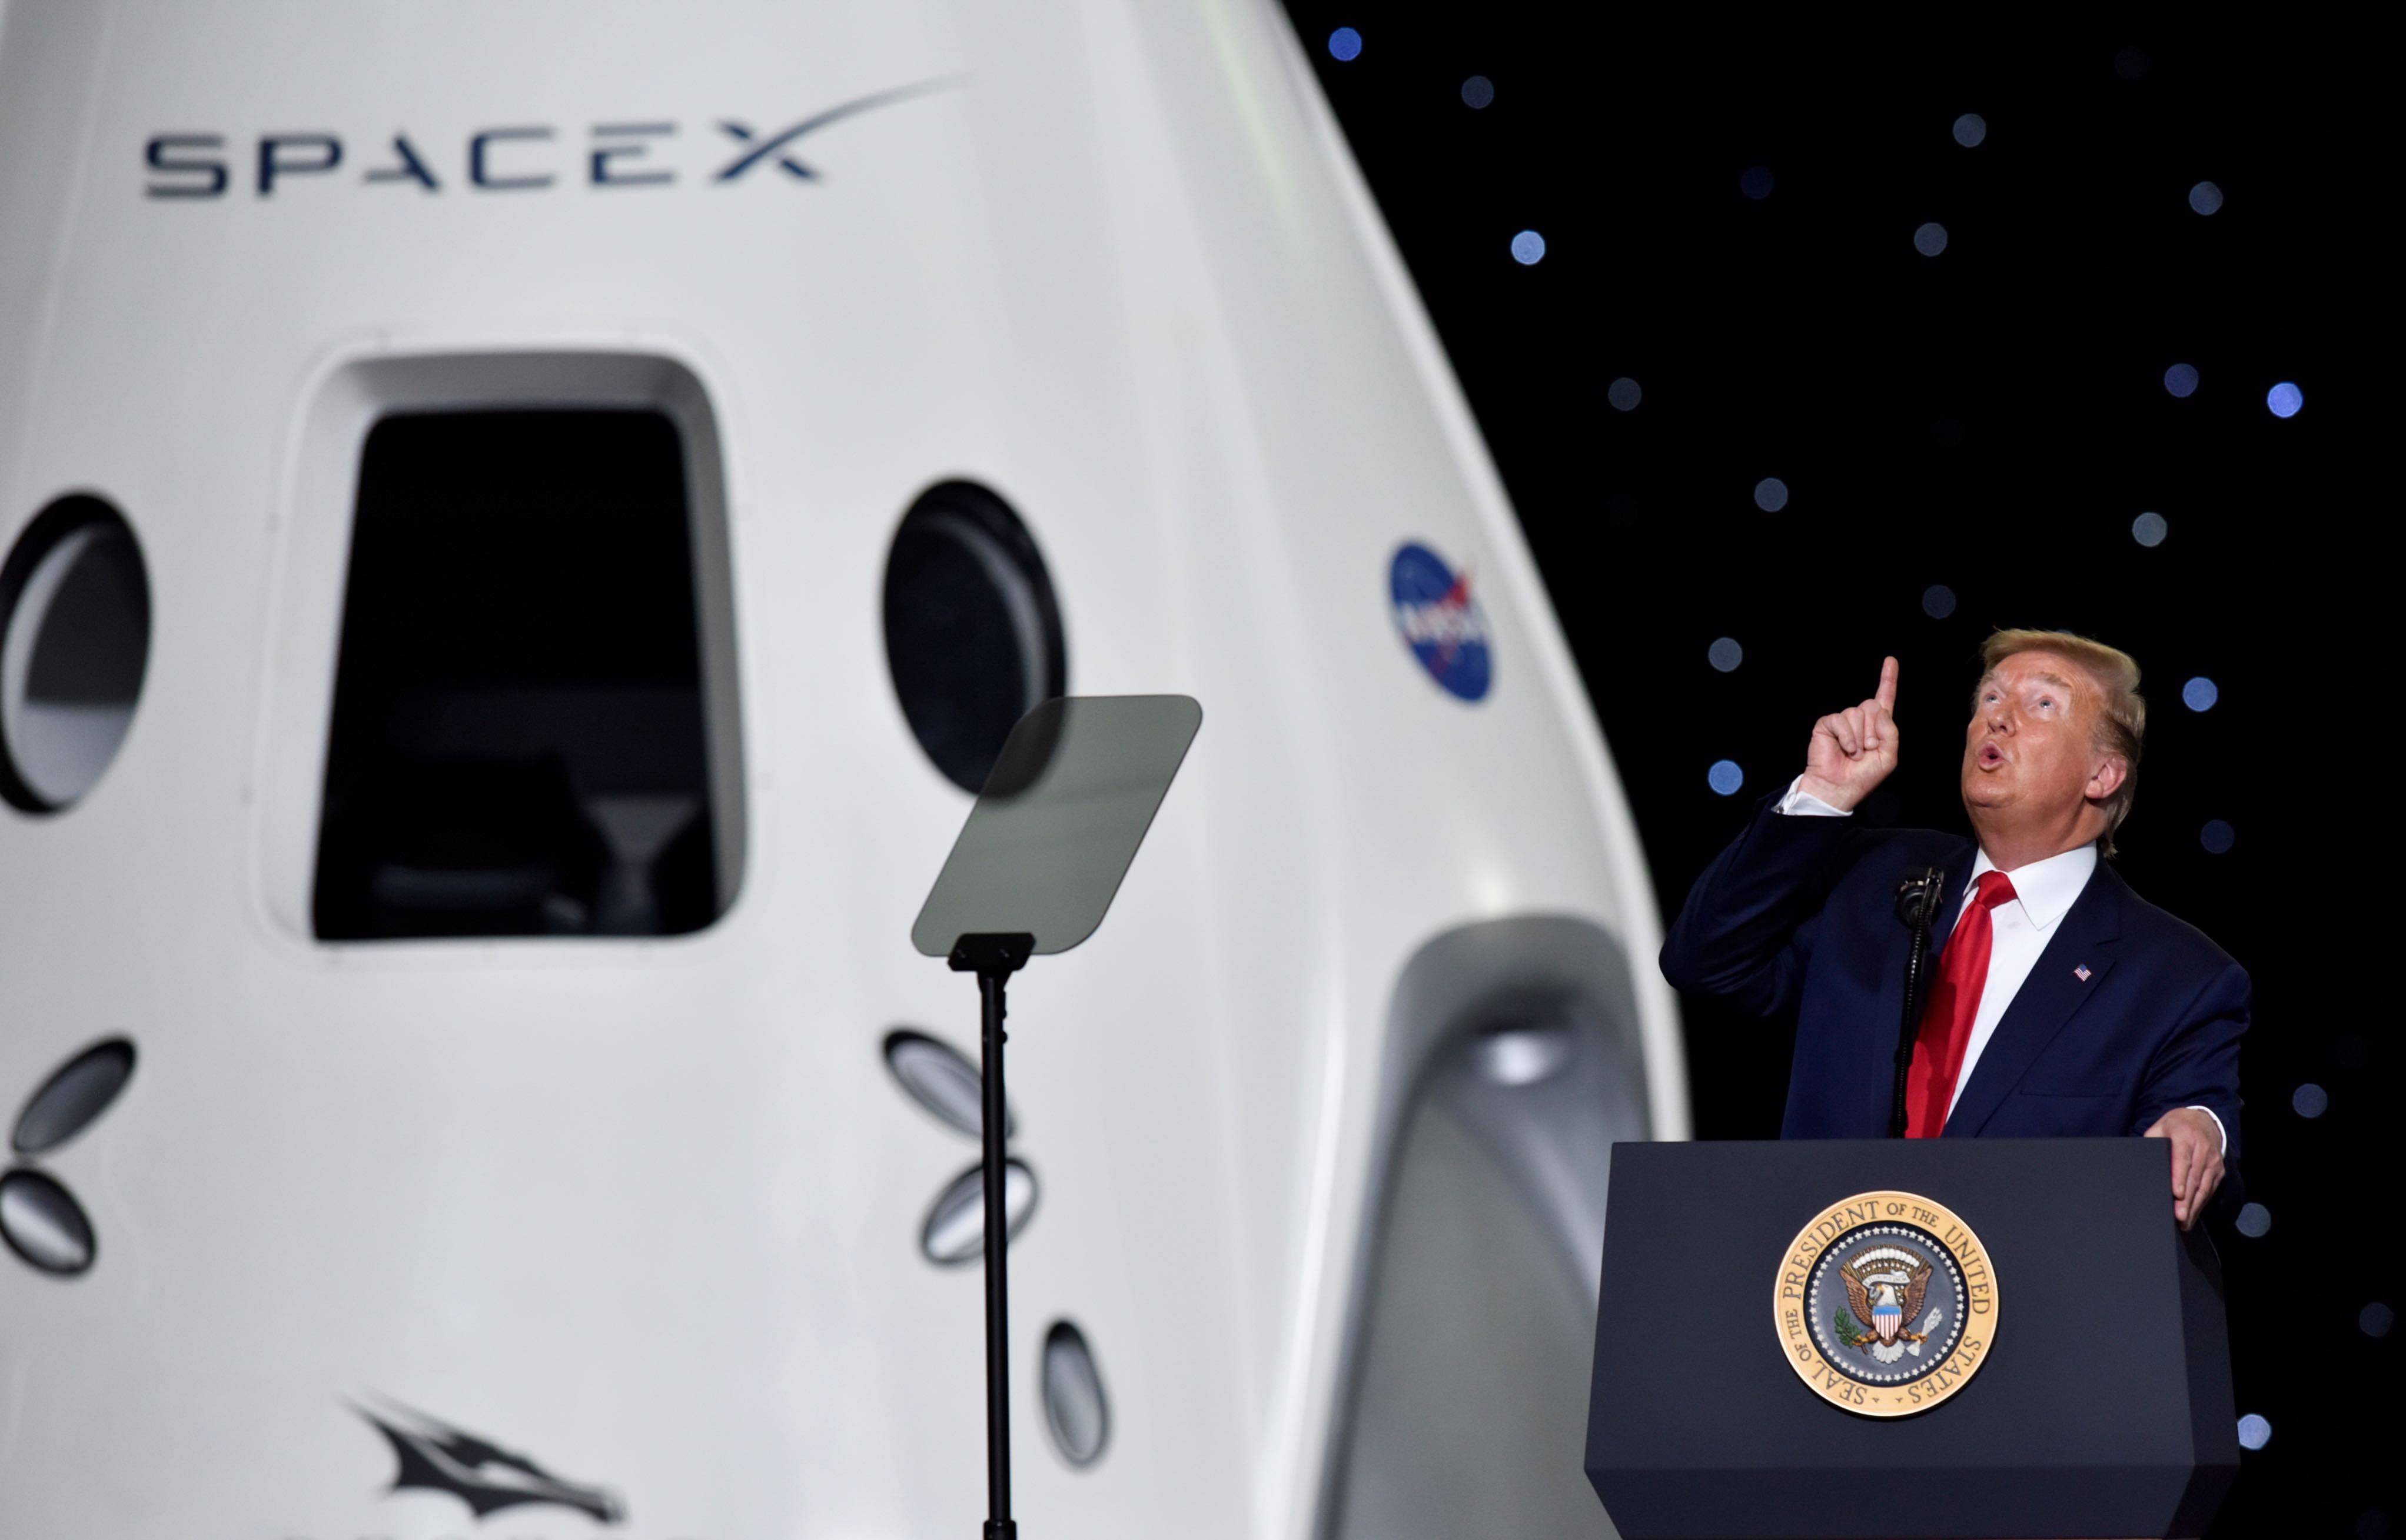 U.S. President Donald Trump gestures as he speaks at a briefing after the launch of a SpaceX Falcon 9 rocket and Crew Dragon spacecraft on NASA's SpaceX Demo-2 mission to the International Space Station from NASA's Kennedy Space Center in Cape Canaveral, Florida. (Reuters photo)